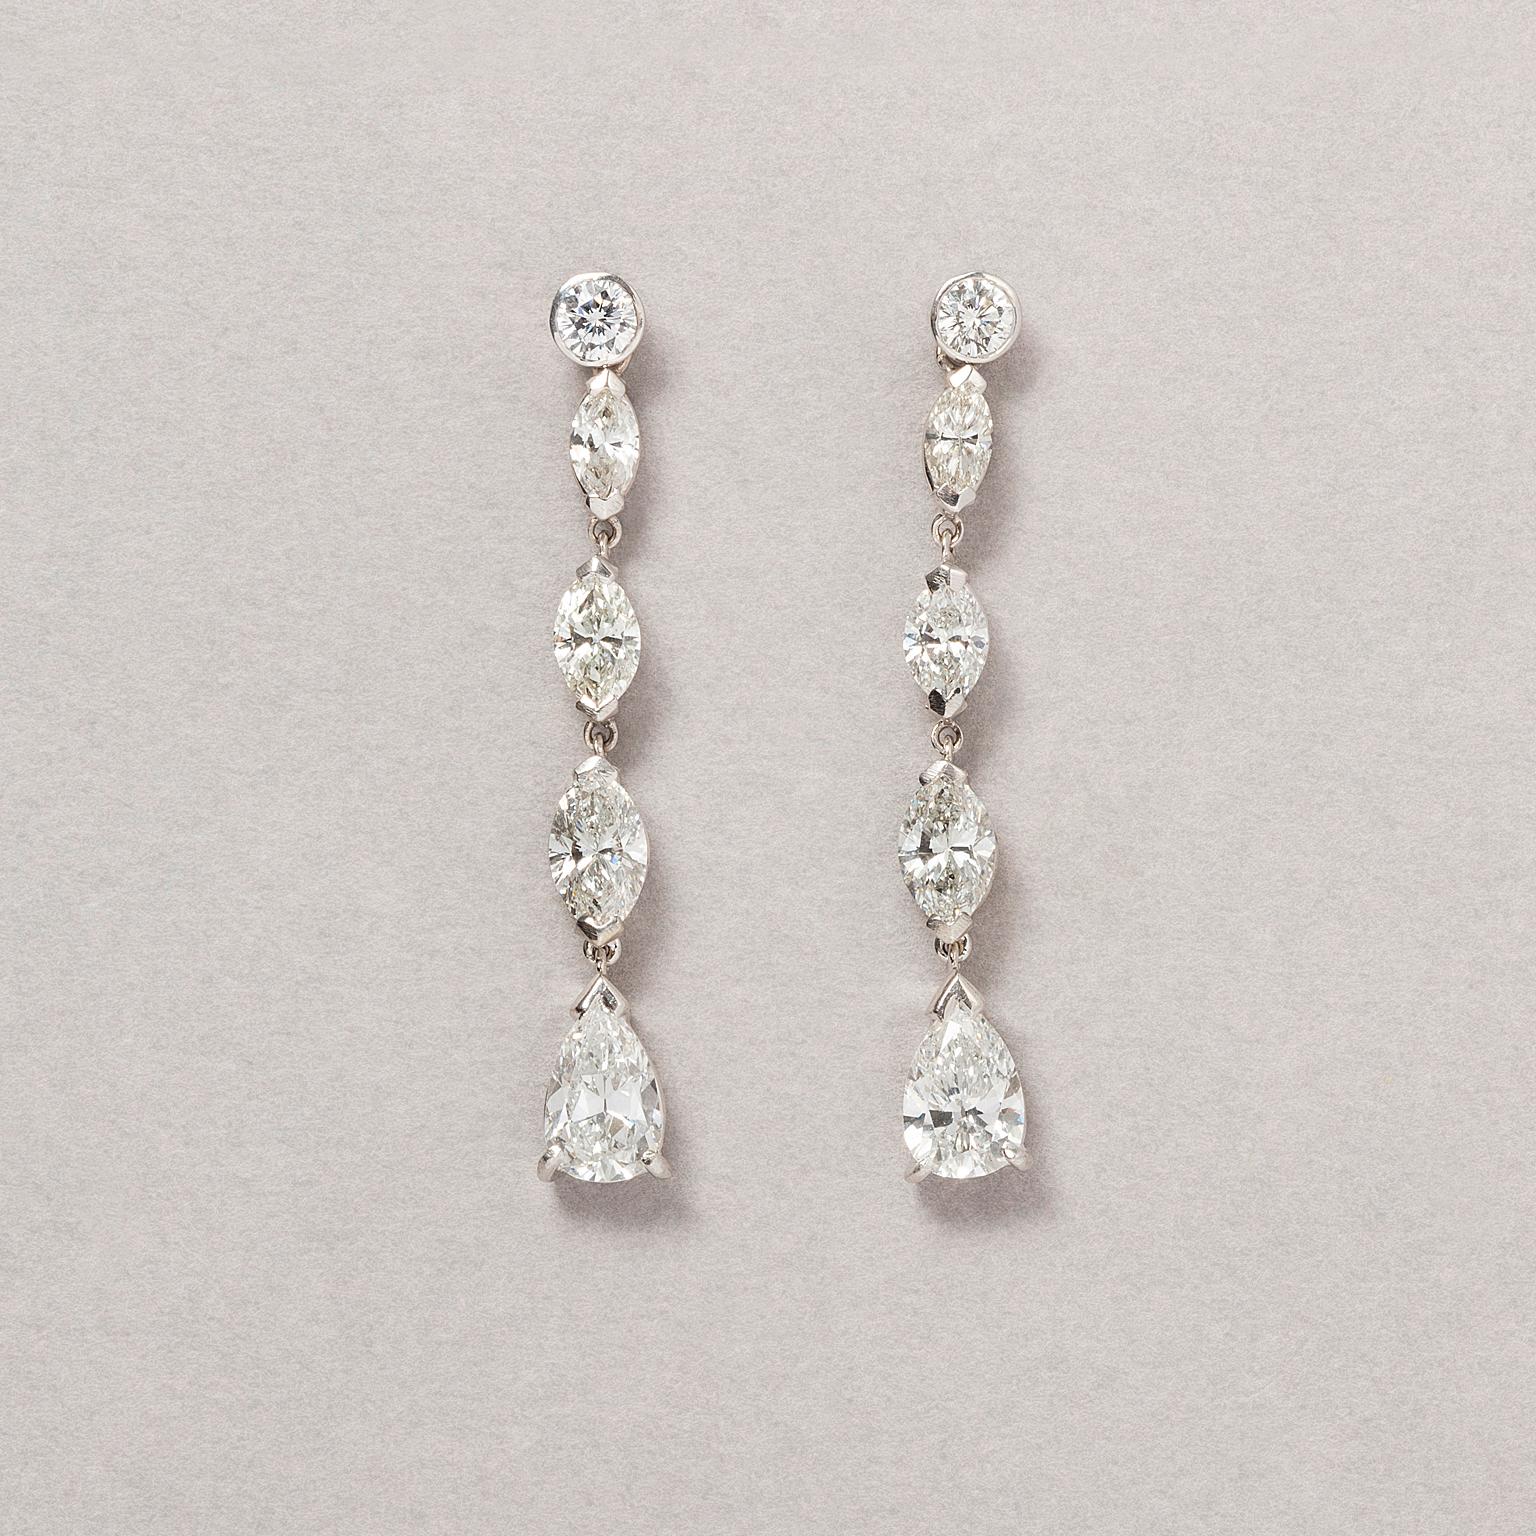 A pair of 14 carat white gold earrings set with a brilliant cut diamond on the stud, followed by three navette cut diamonds, increasing in size with a dangling pear cut diamond on the bottom (app. 2.86 carat in total, Si, VS, VVS, F-G color with the